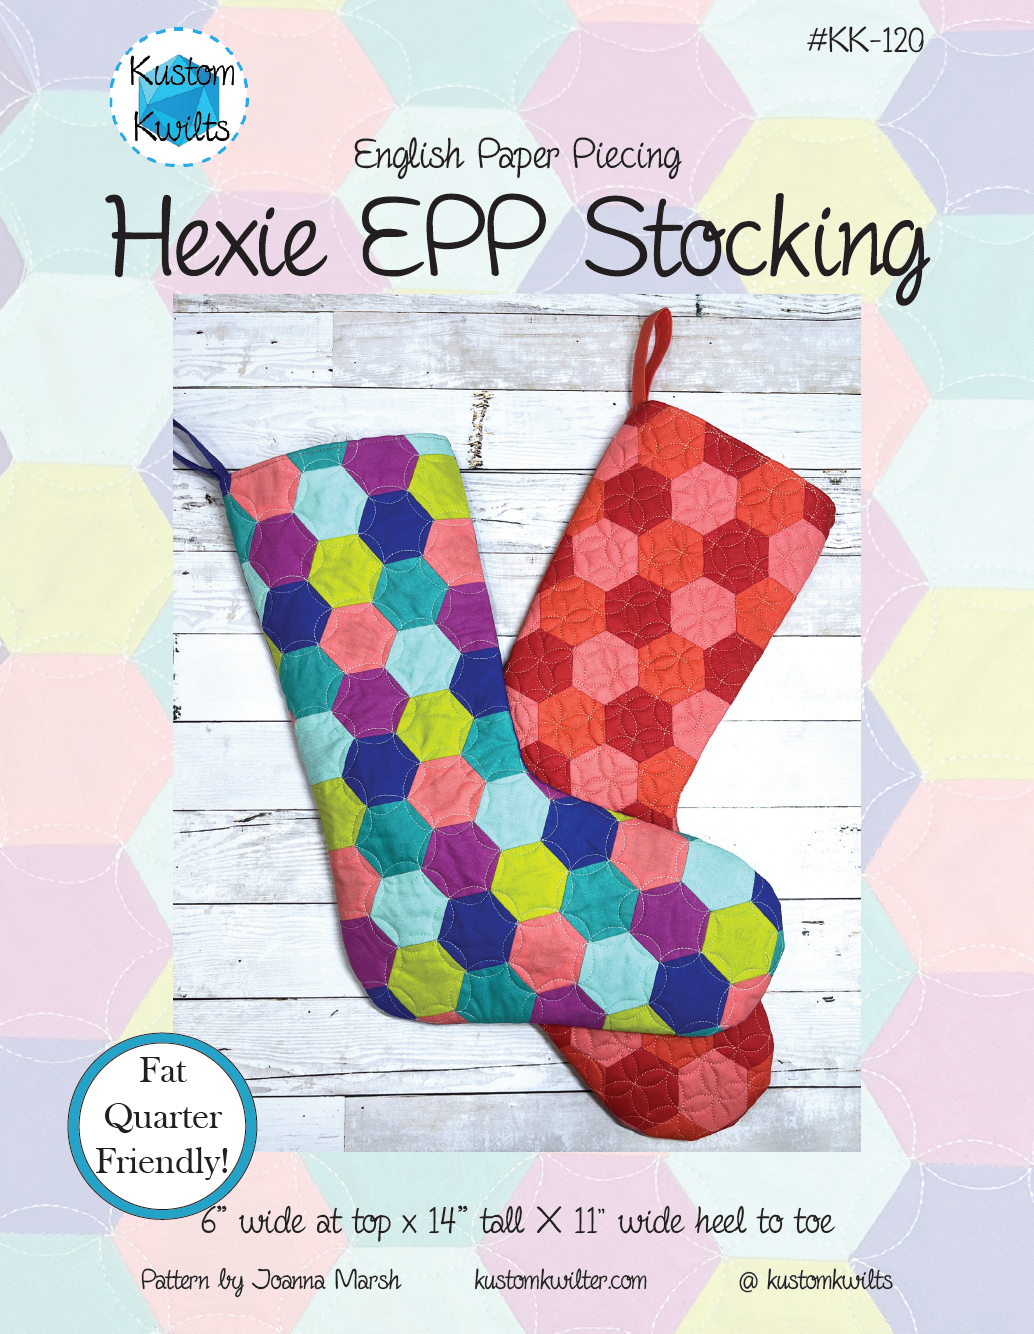 Multi color stocking sewn from hexagon shapes and a coral one as well